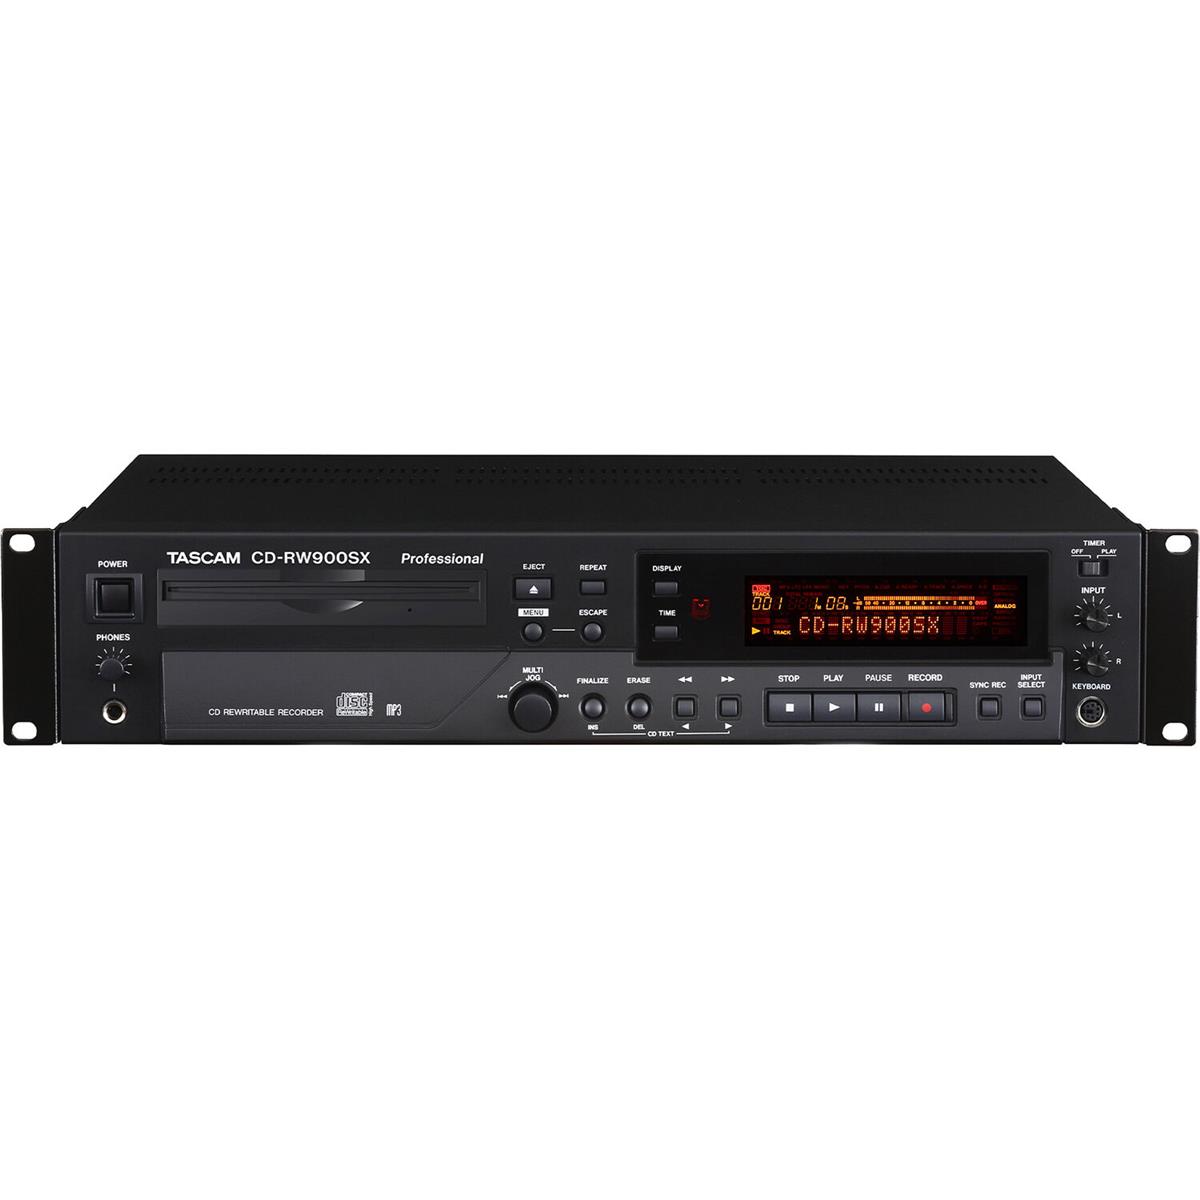 Image of Tascam CD-RW900SX Professional CD Recorder/Player